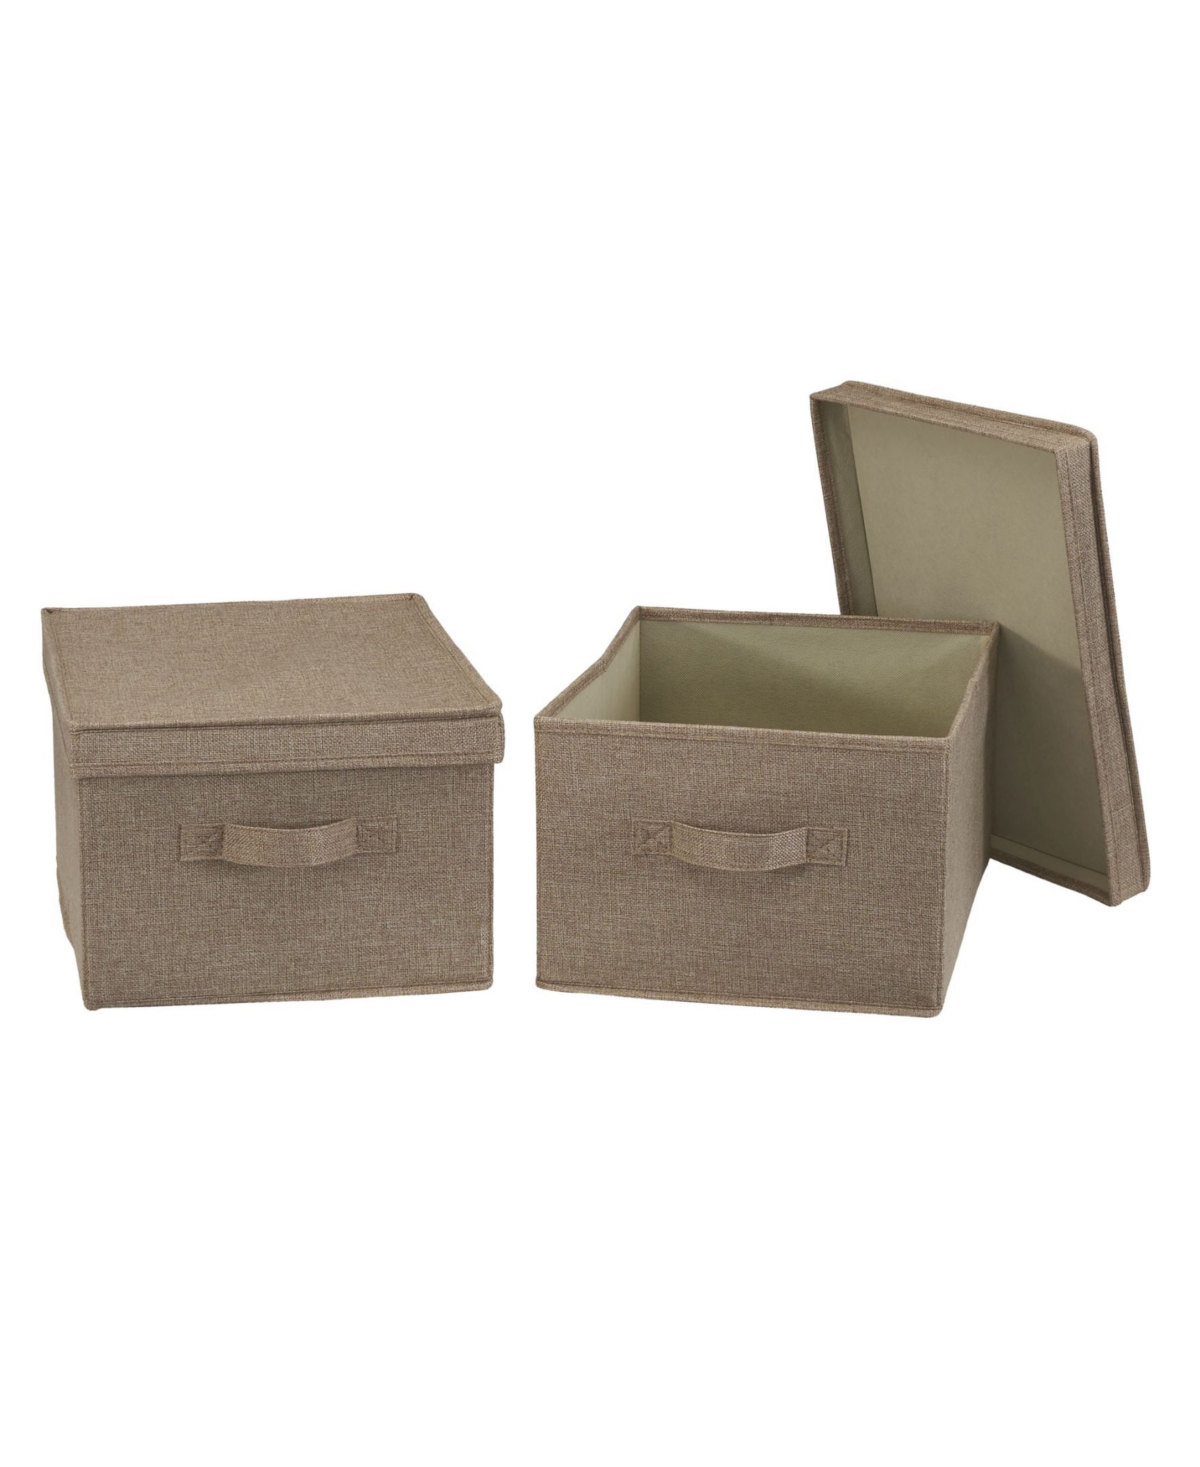 Household Essentials Large Fabric Storage Bins, Set Of 2 In Latte Linen